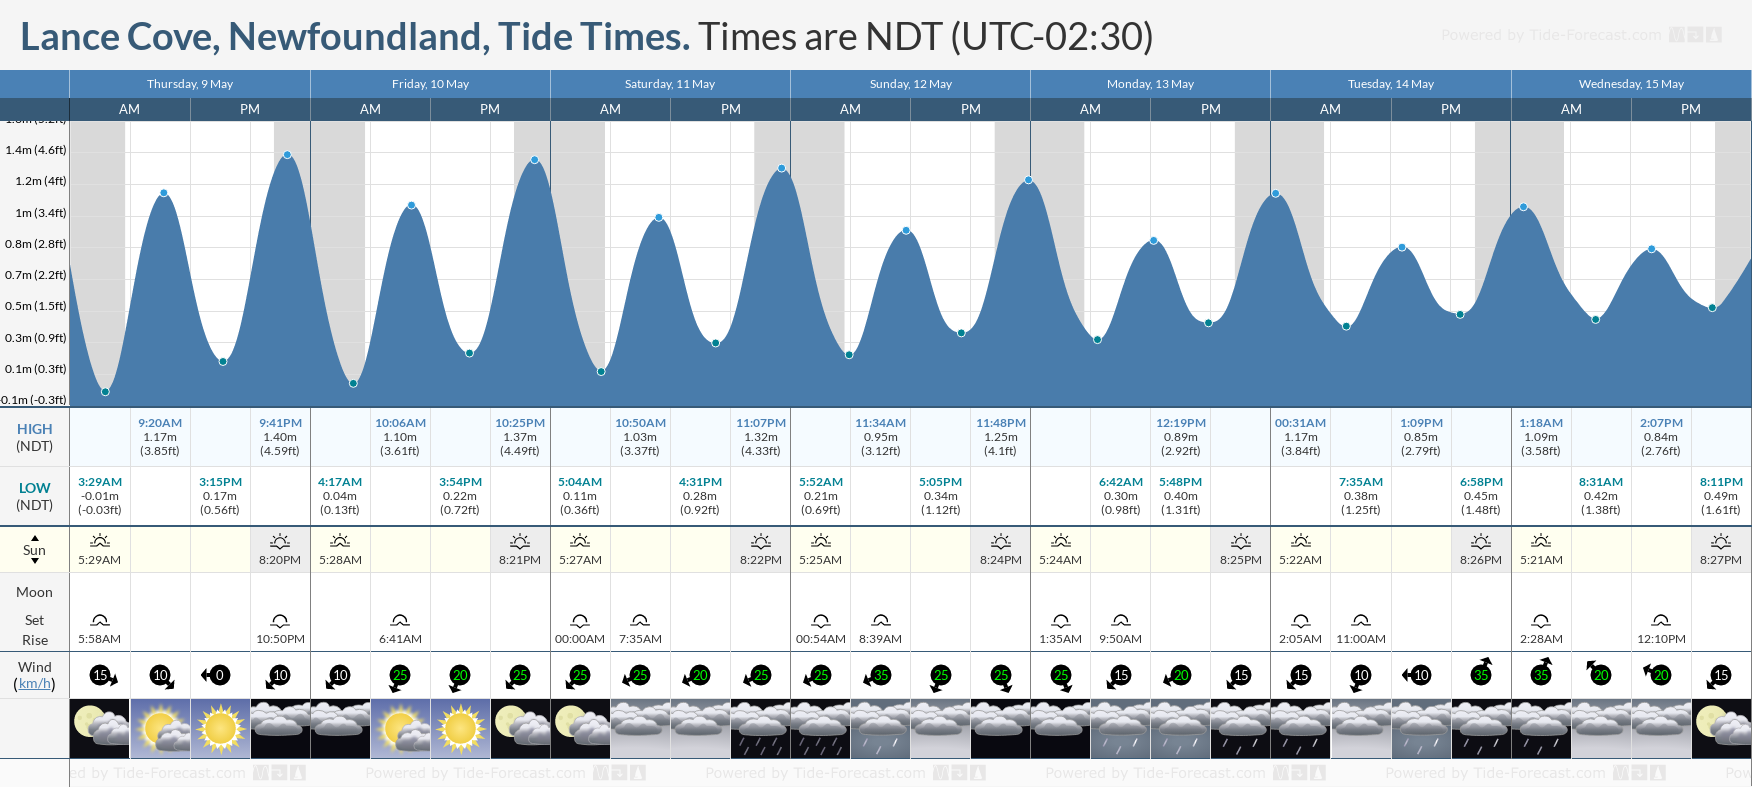 Lance Cove, Newfoundland Tide Chart including high and low tide tide times for the next 7 days